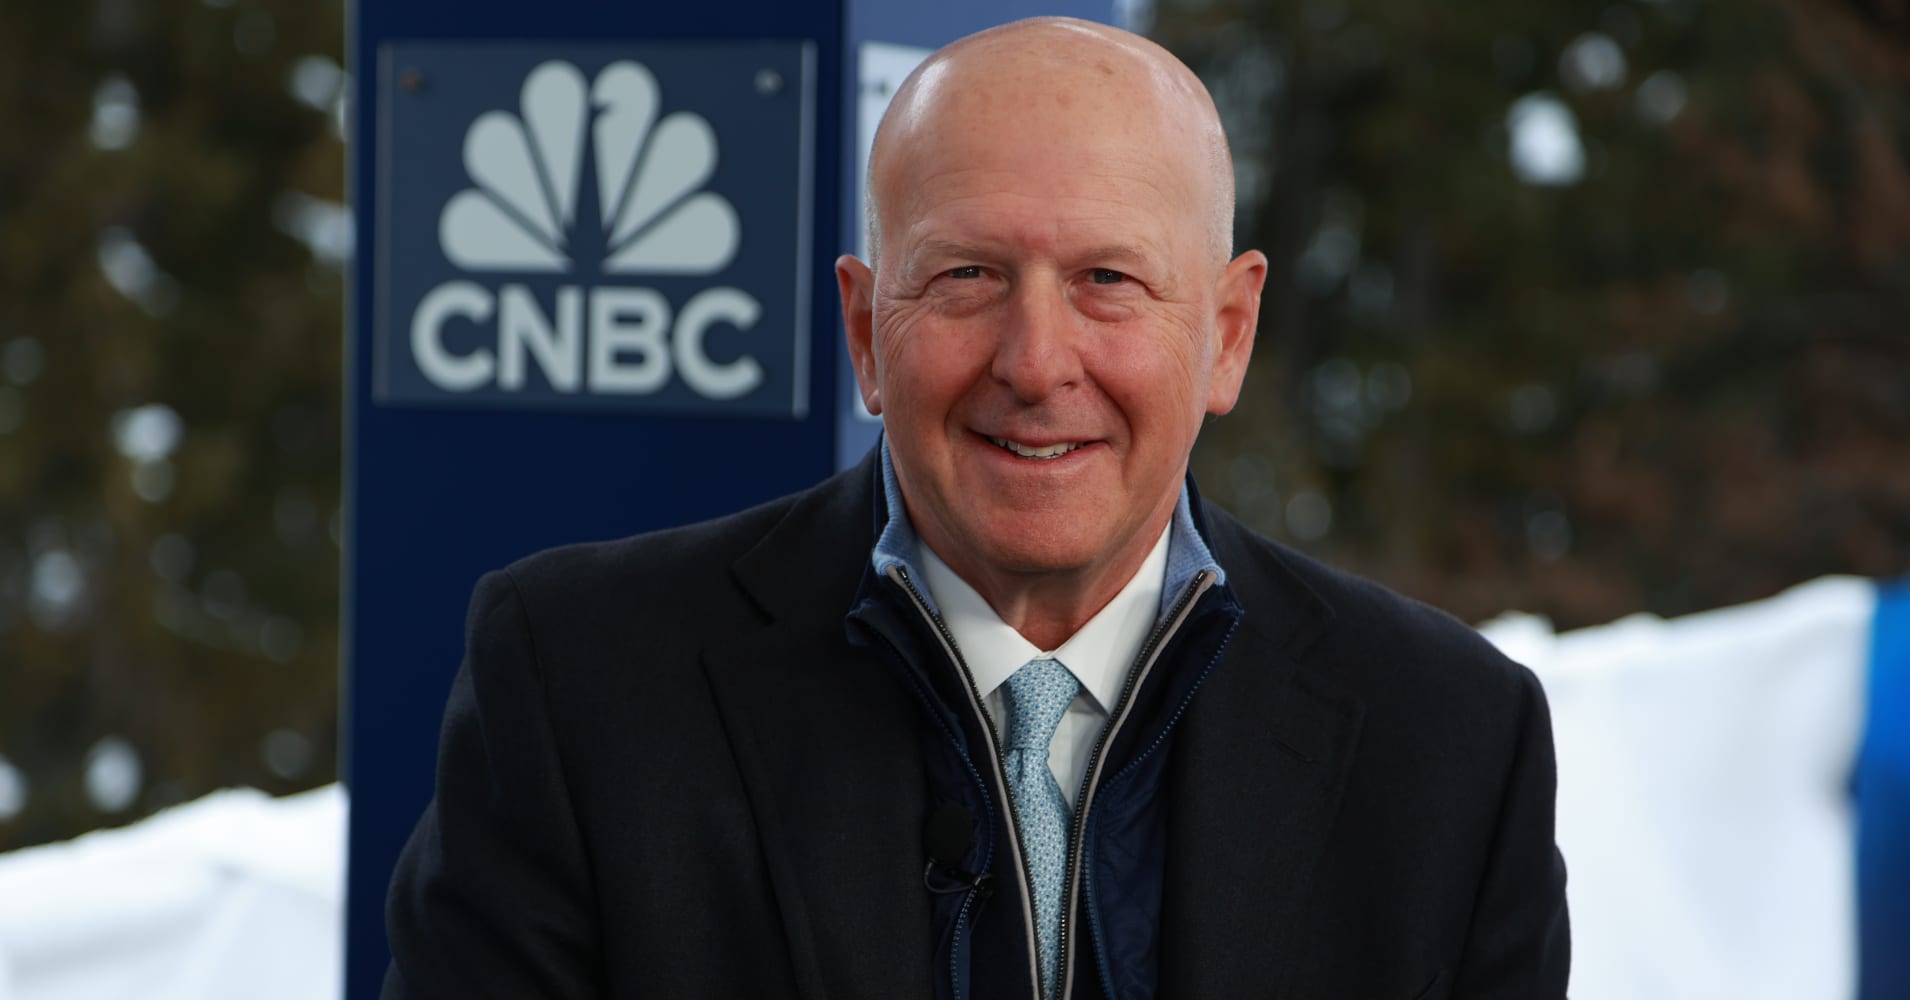 goldman sachs reports earnings before market open — here's what the street expects